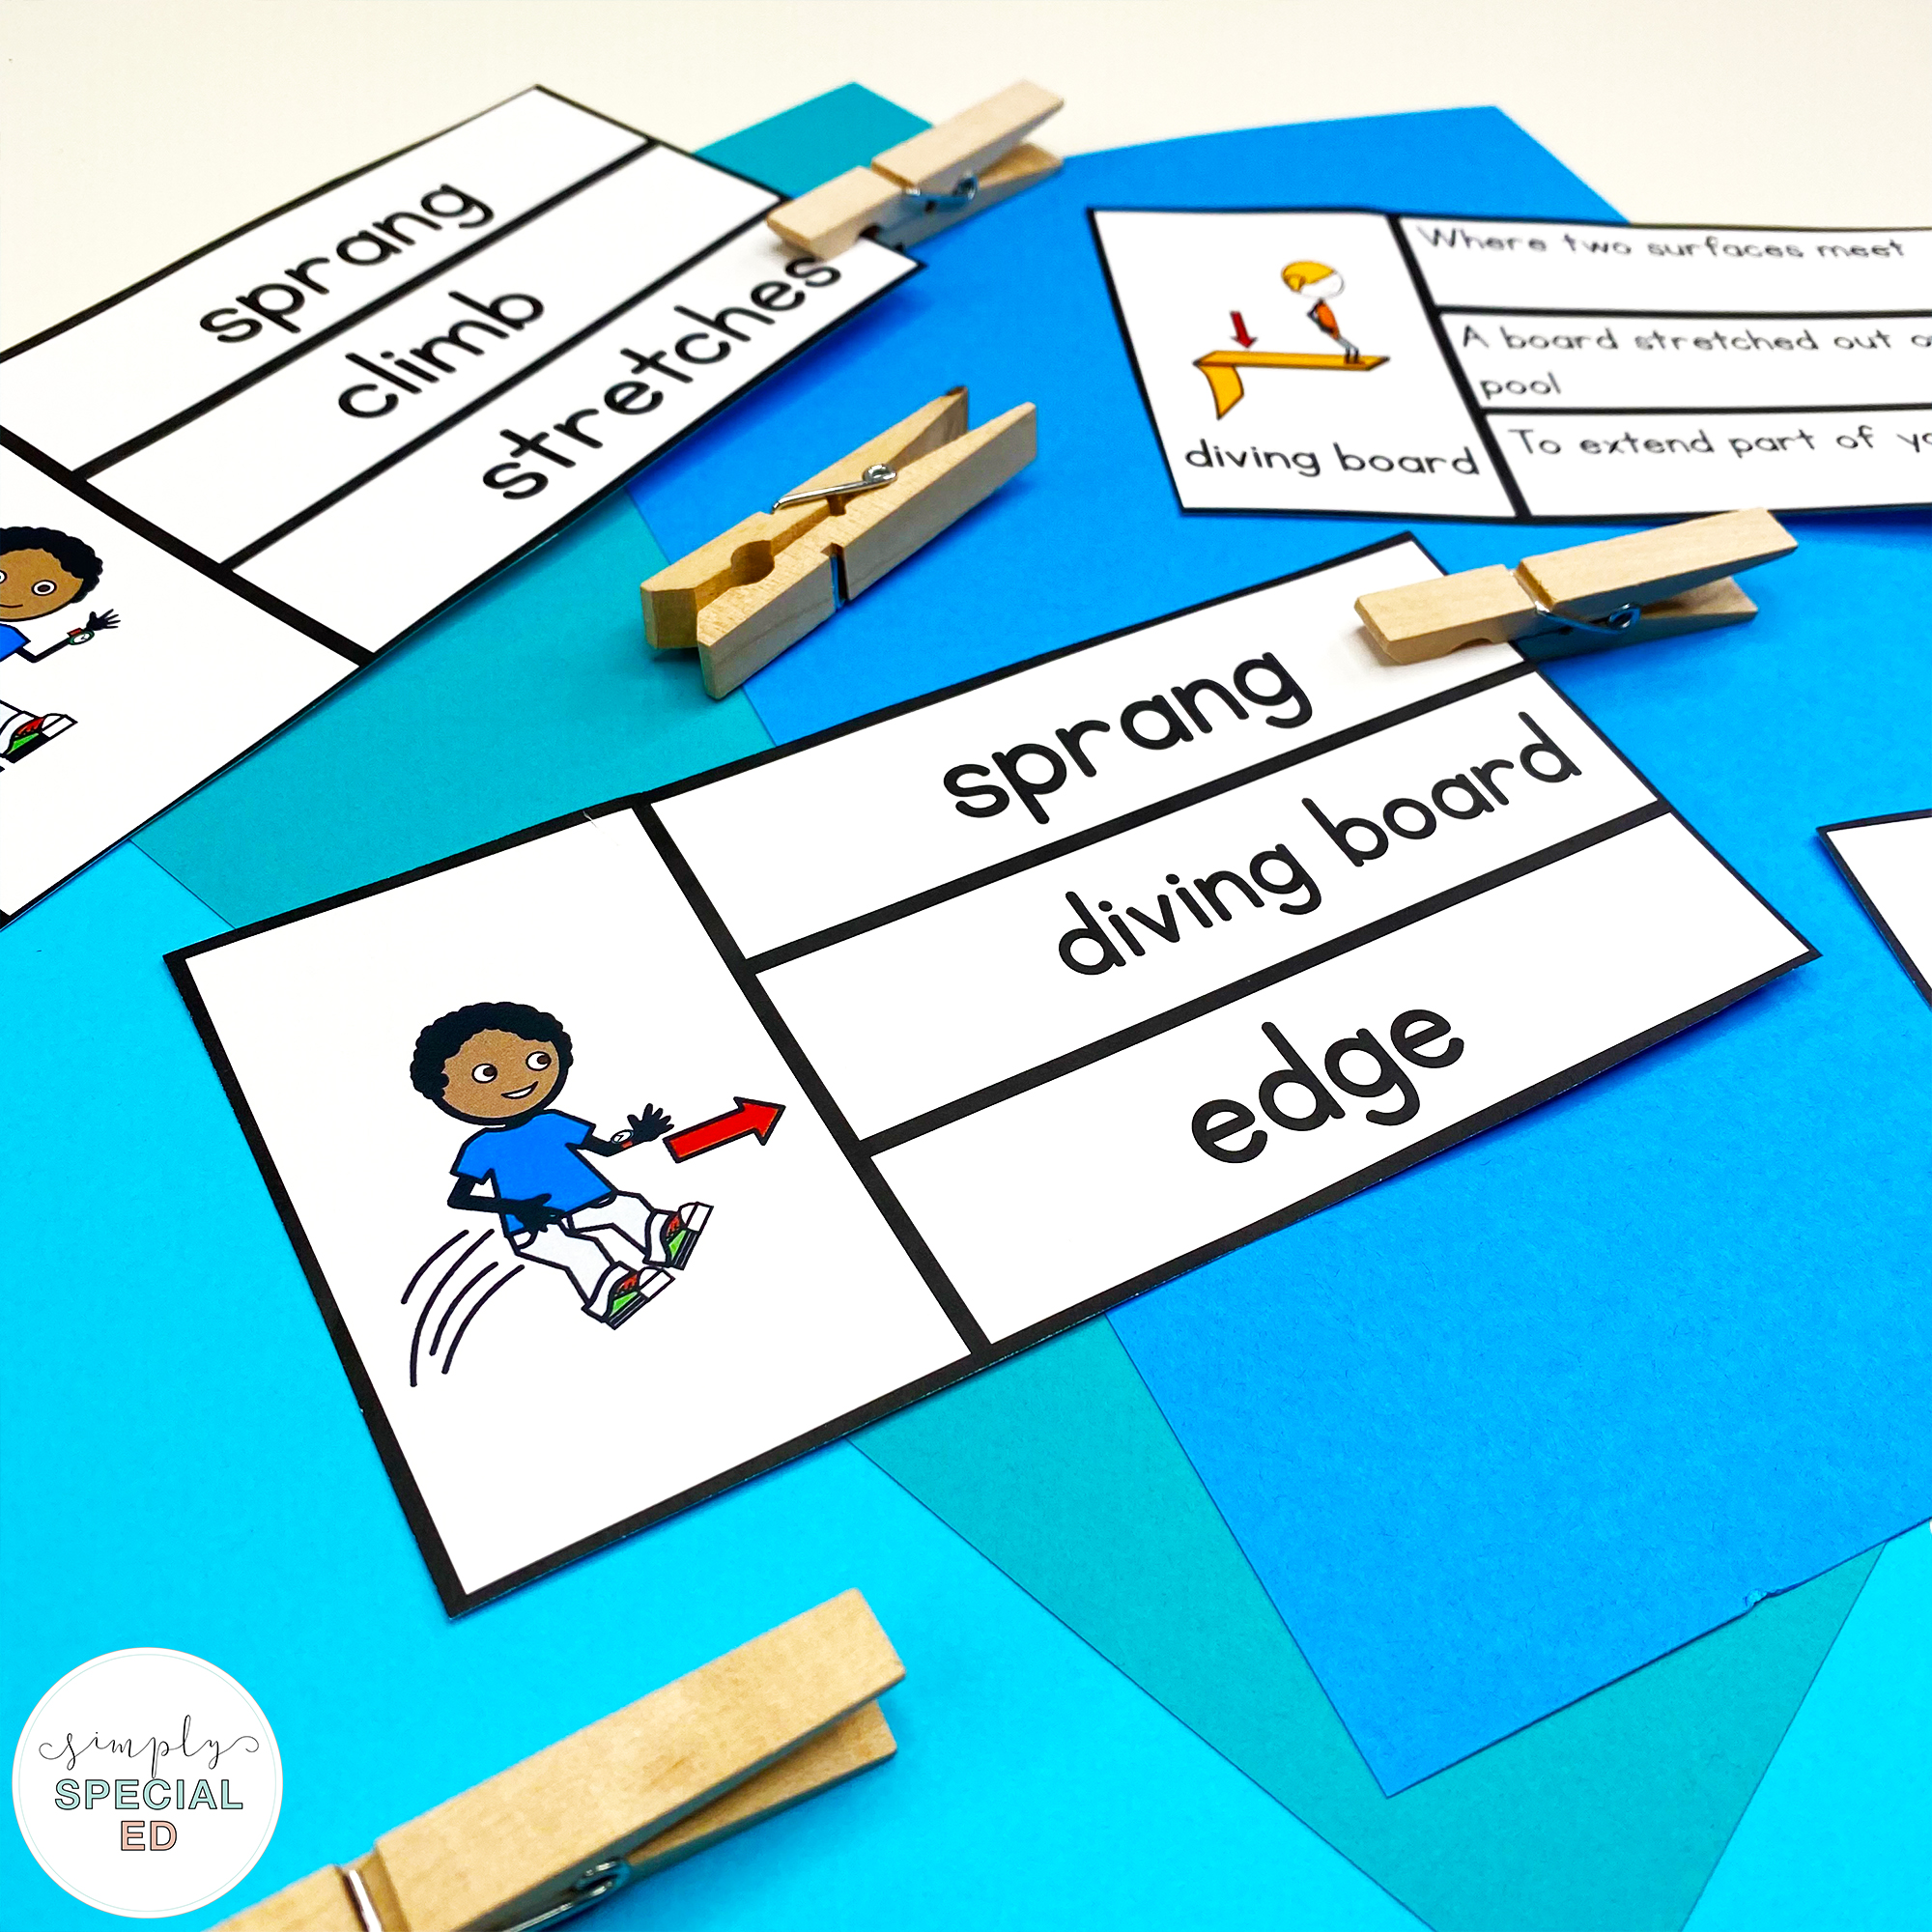 4 diferentiated Activities for using the book Jabari Jumps in your special education classroom this summer (or ESY!) 